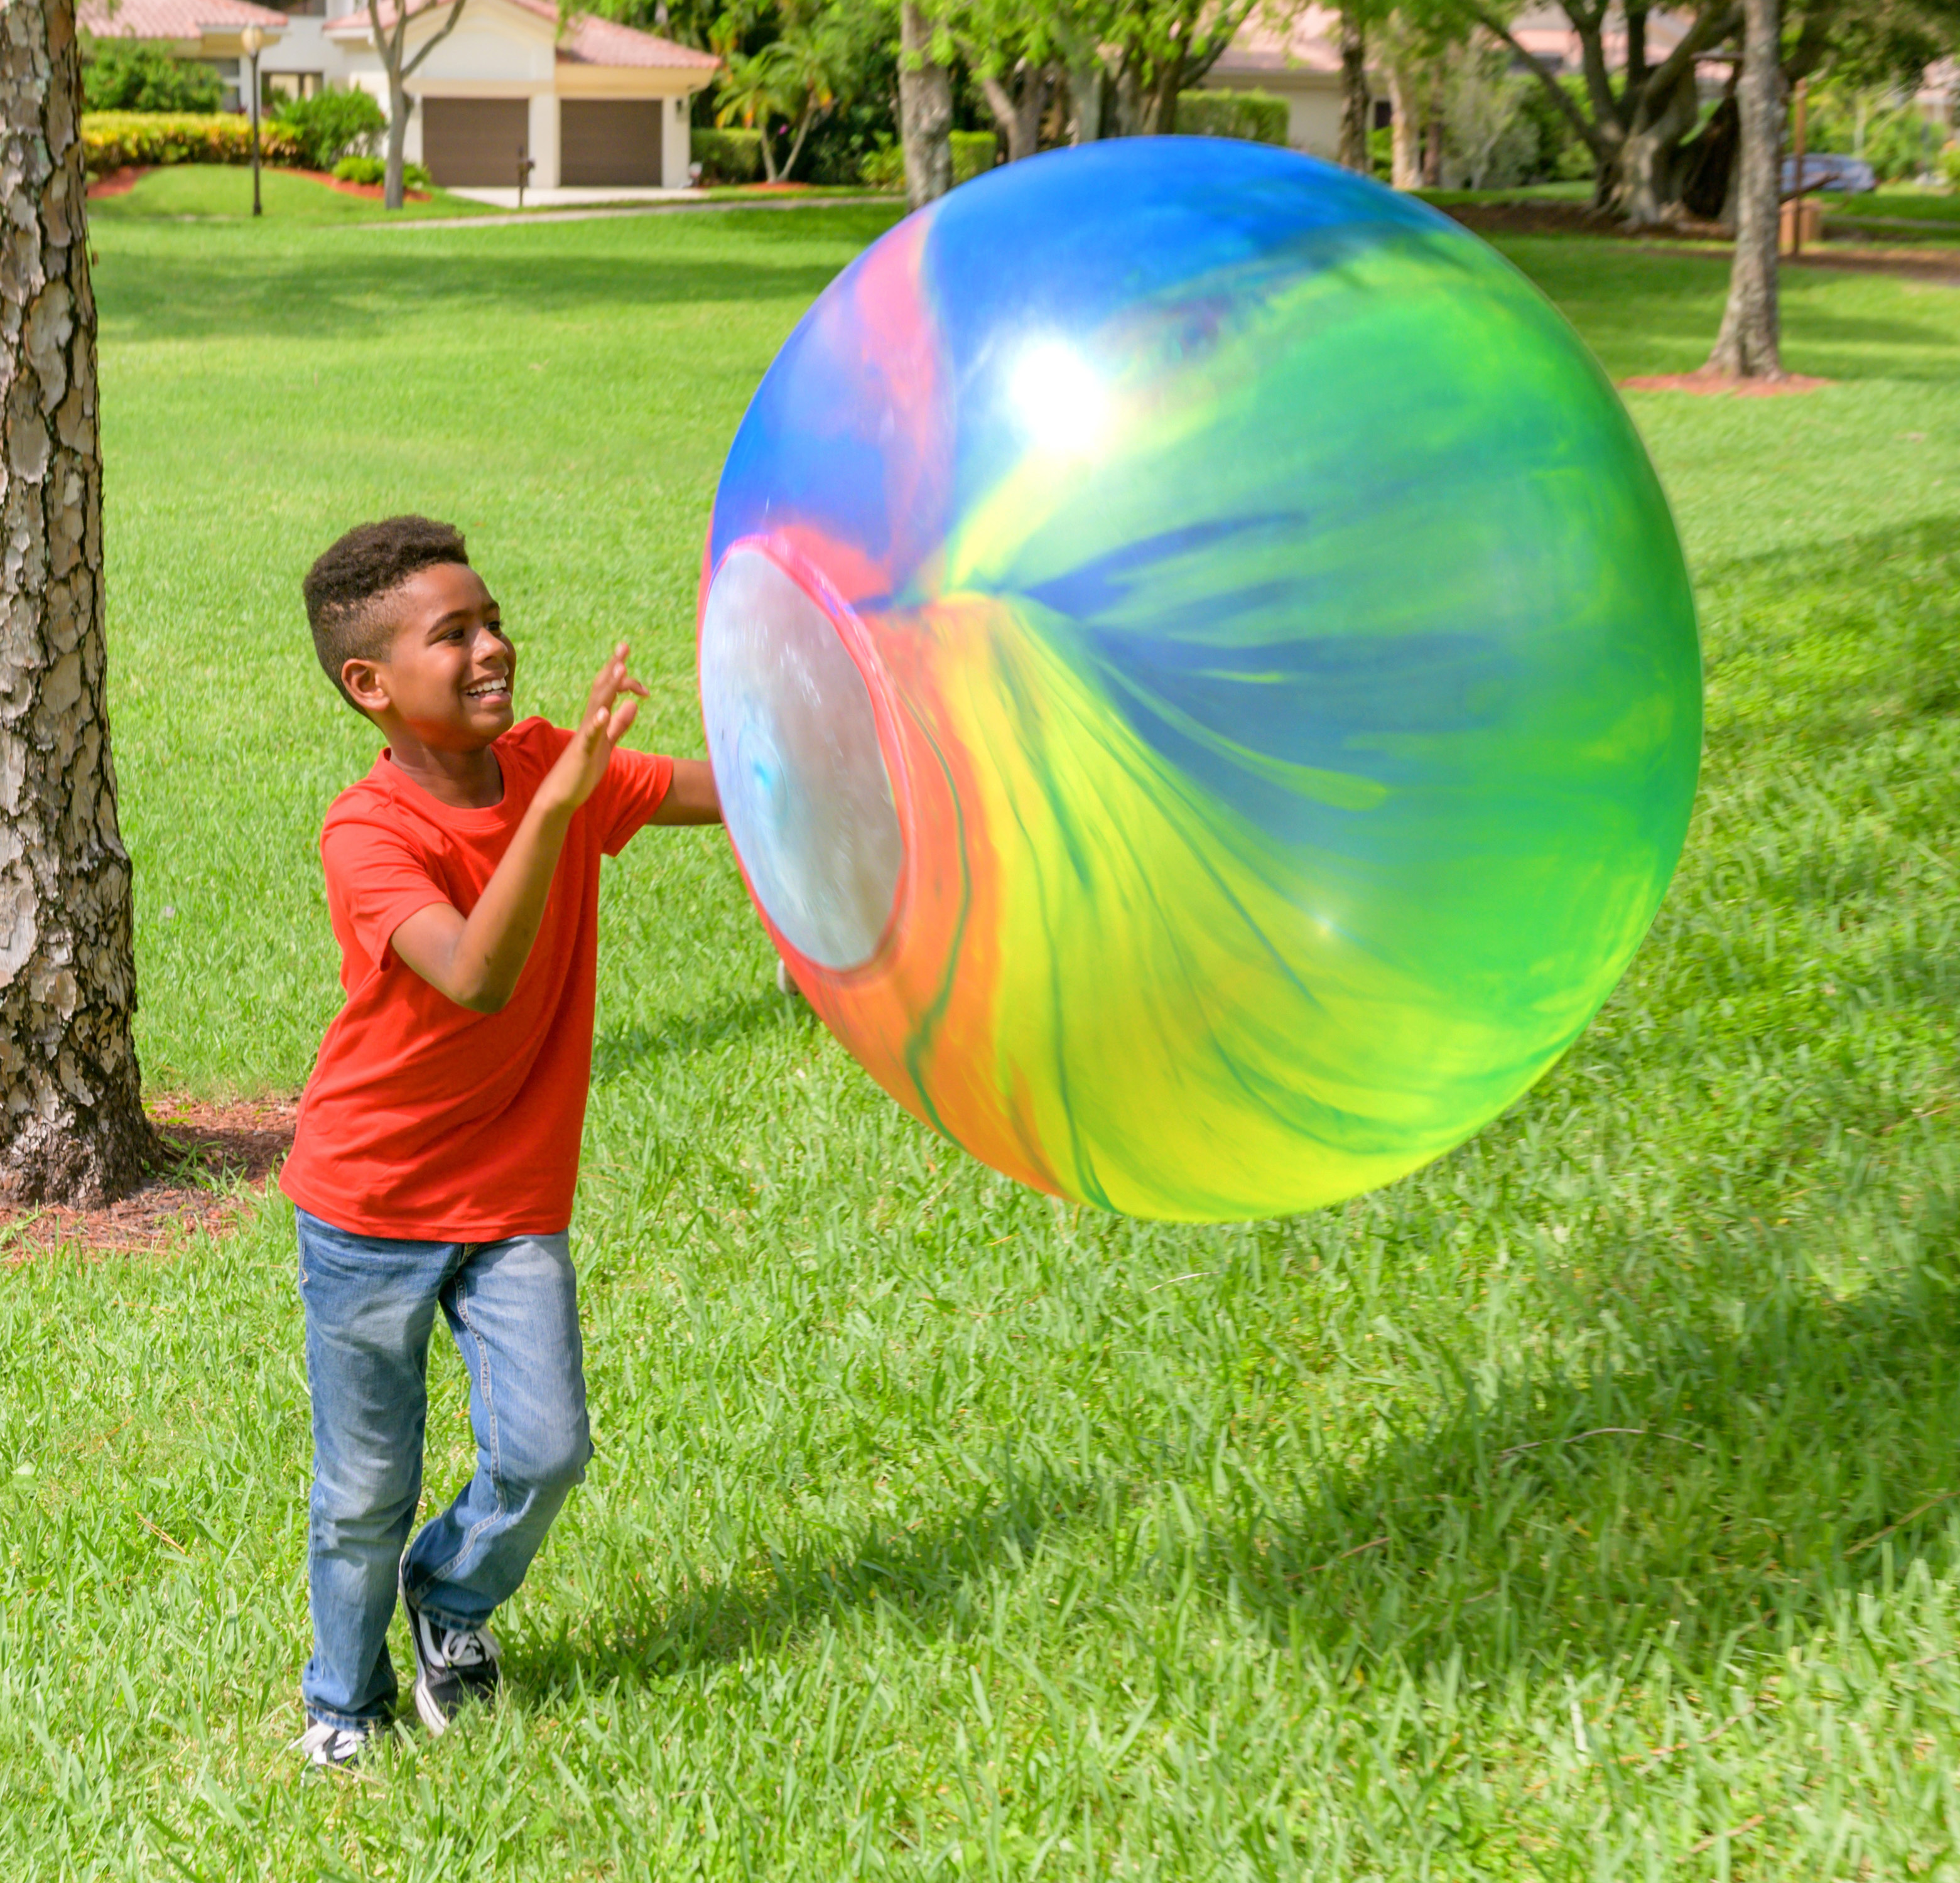 groovy wubble bubble ball with pump